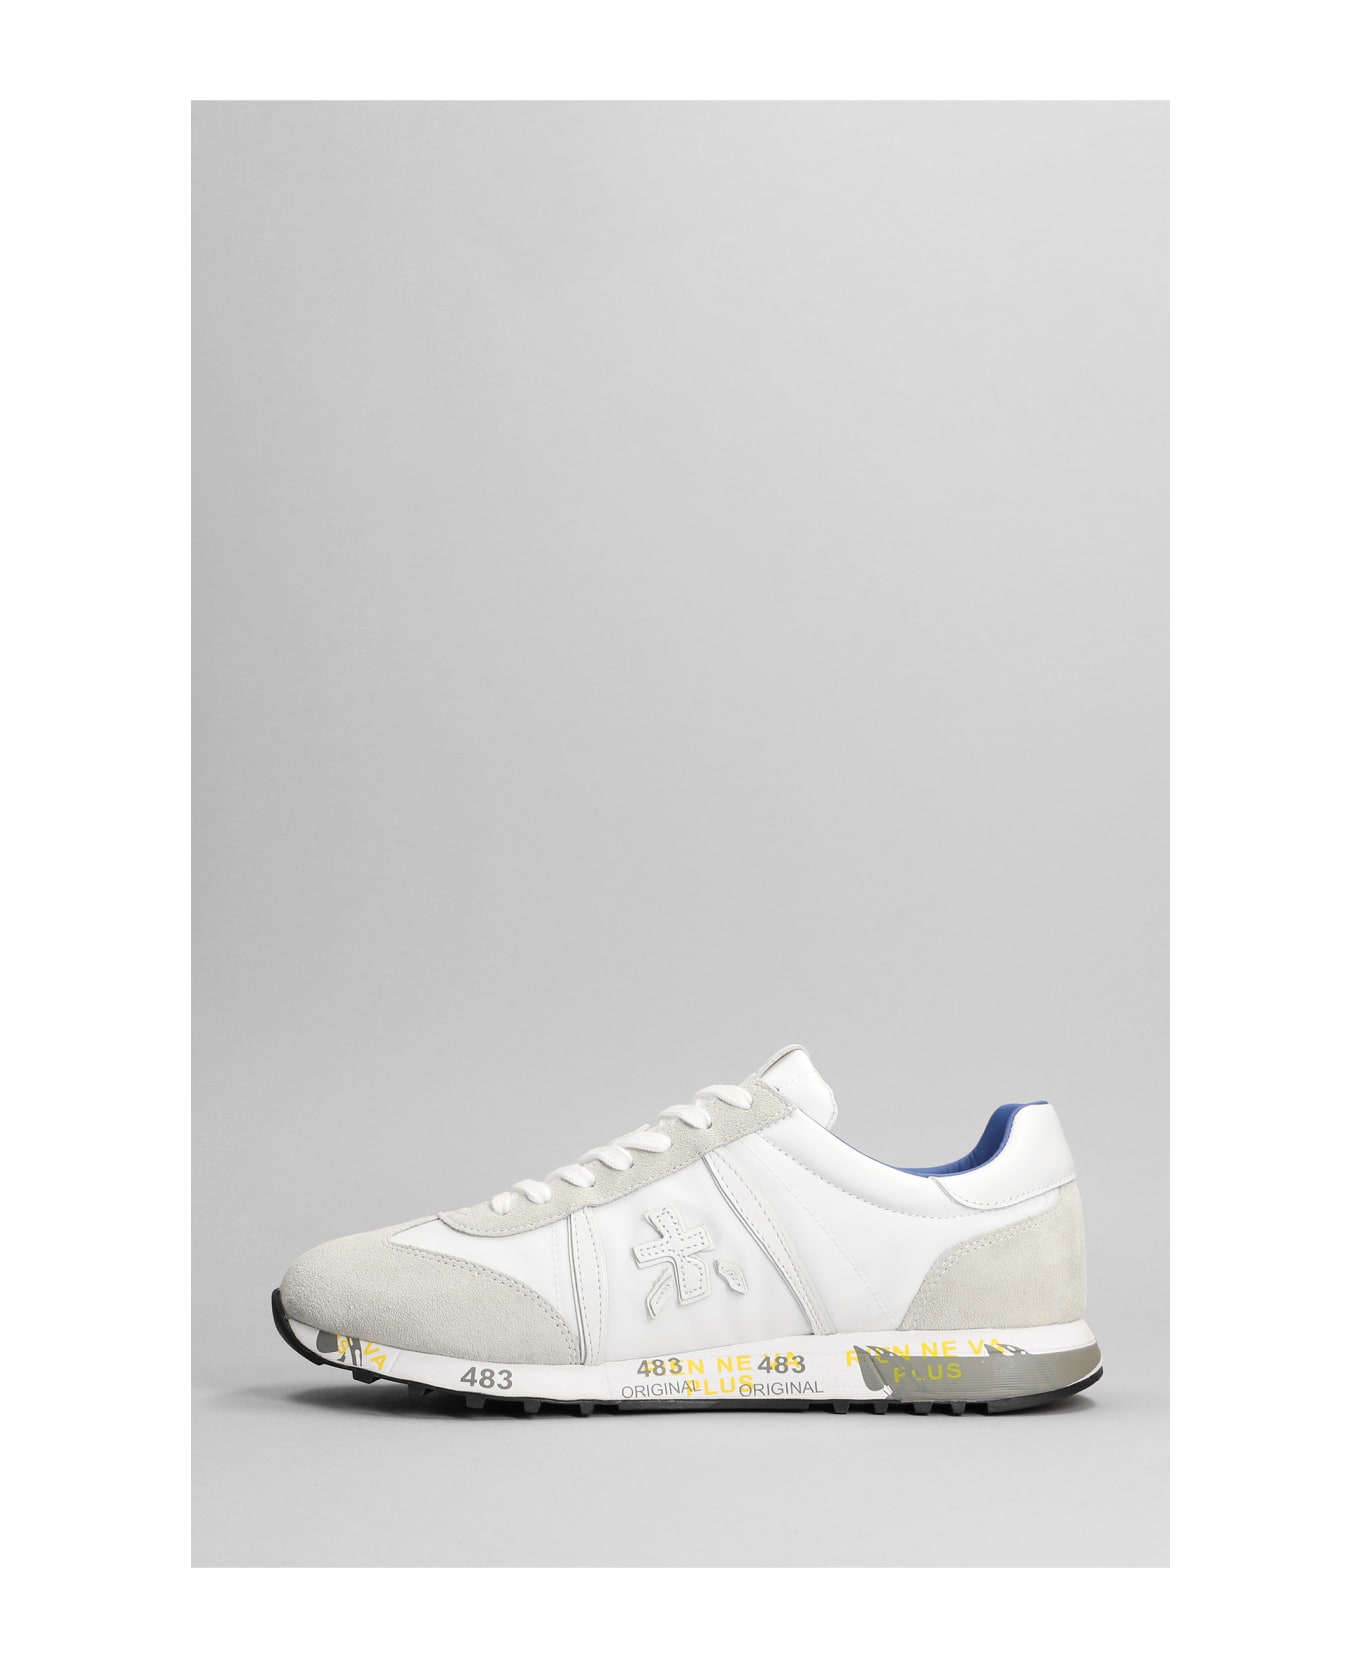 Premiata Lucy Sneakers In White Suede And Fabric - white